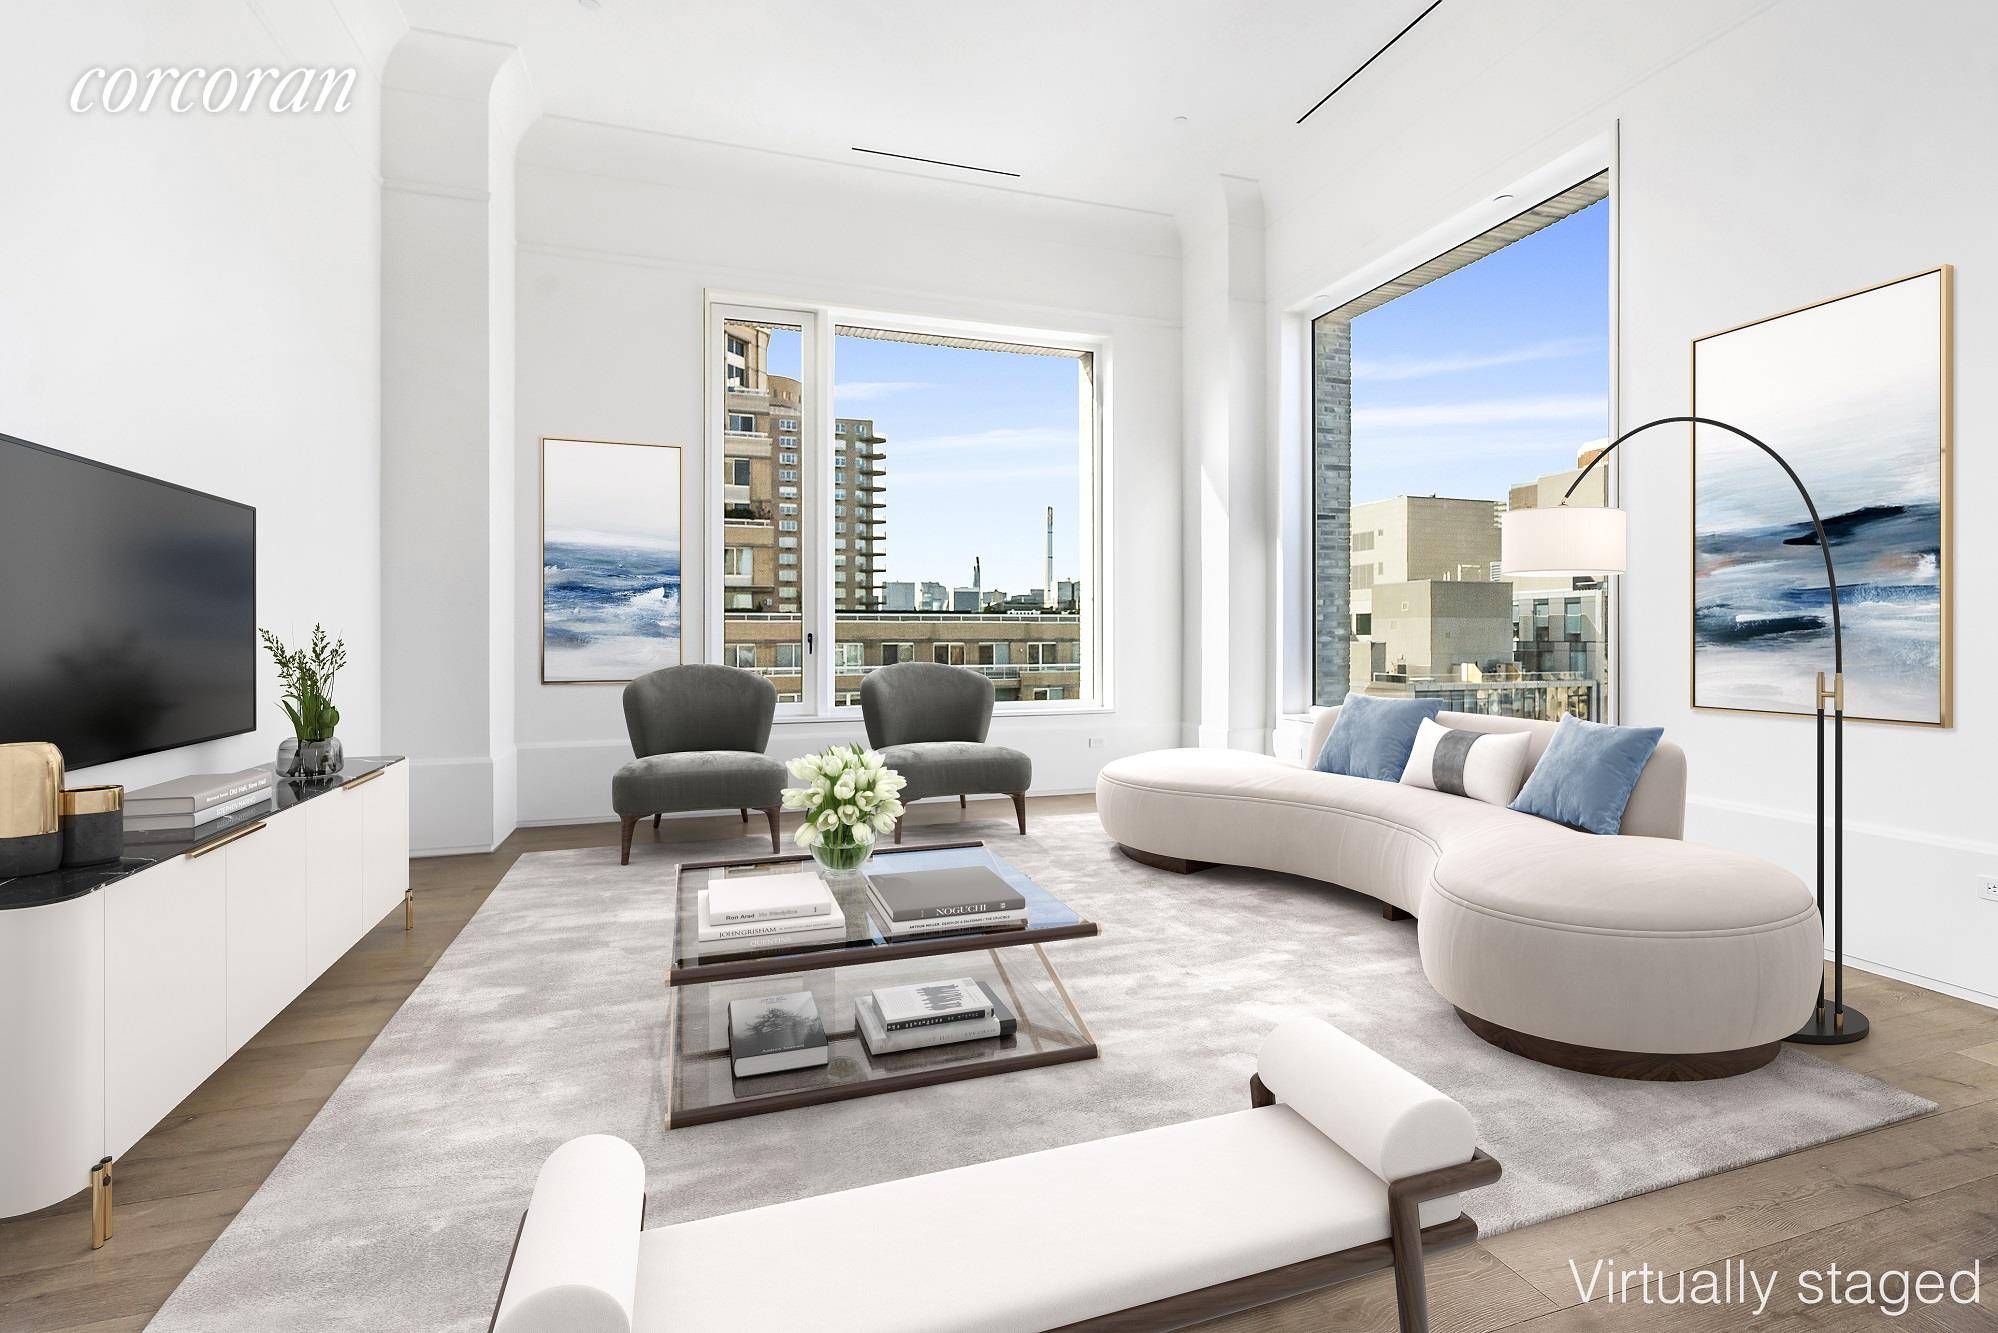 Majestic is the first word that will come to your mind when you first enter this never lived in, brand new home with soaring 14 foot ceilings, 9 foot windows ...